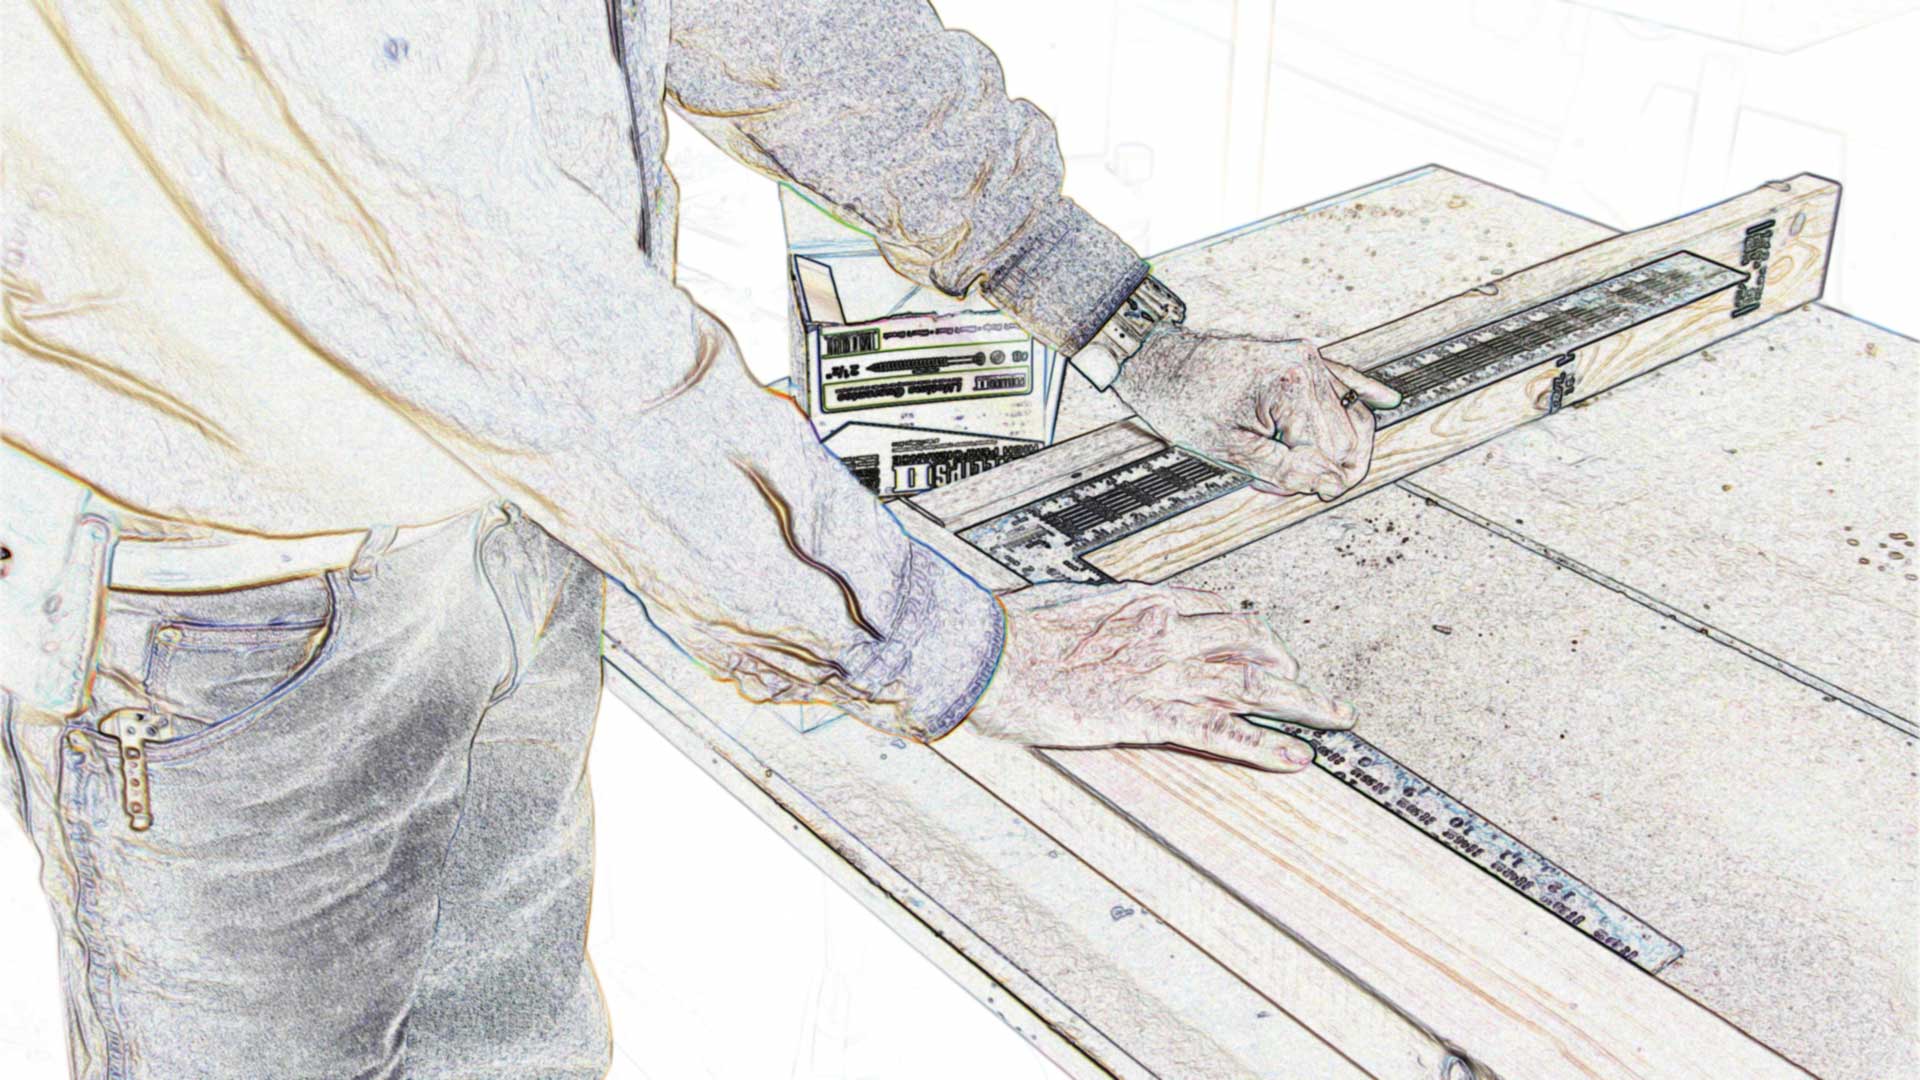 drawing rendering man workbench tools measuring wood project lumber bench construction